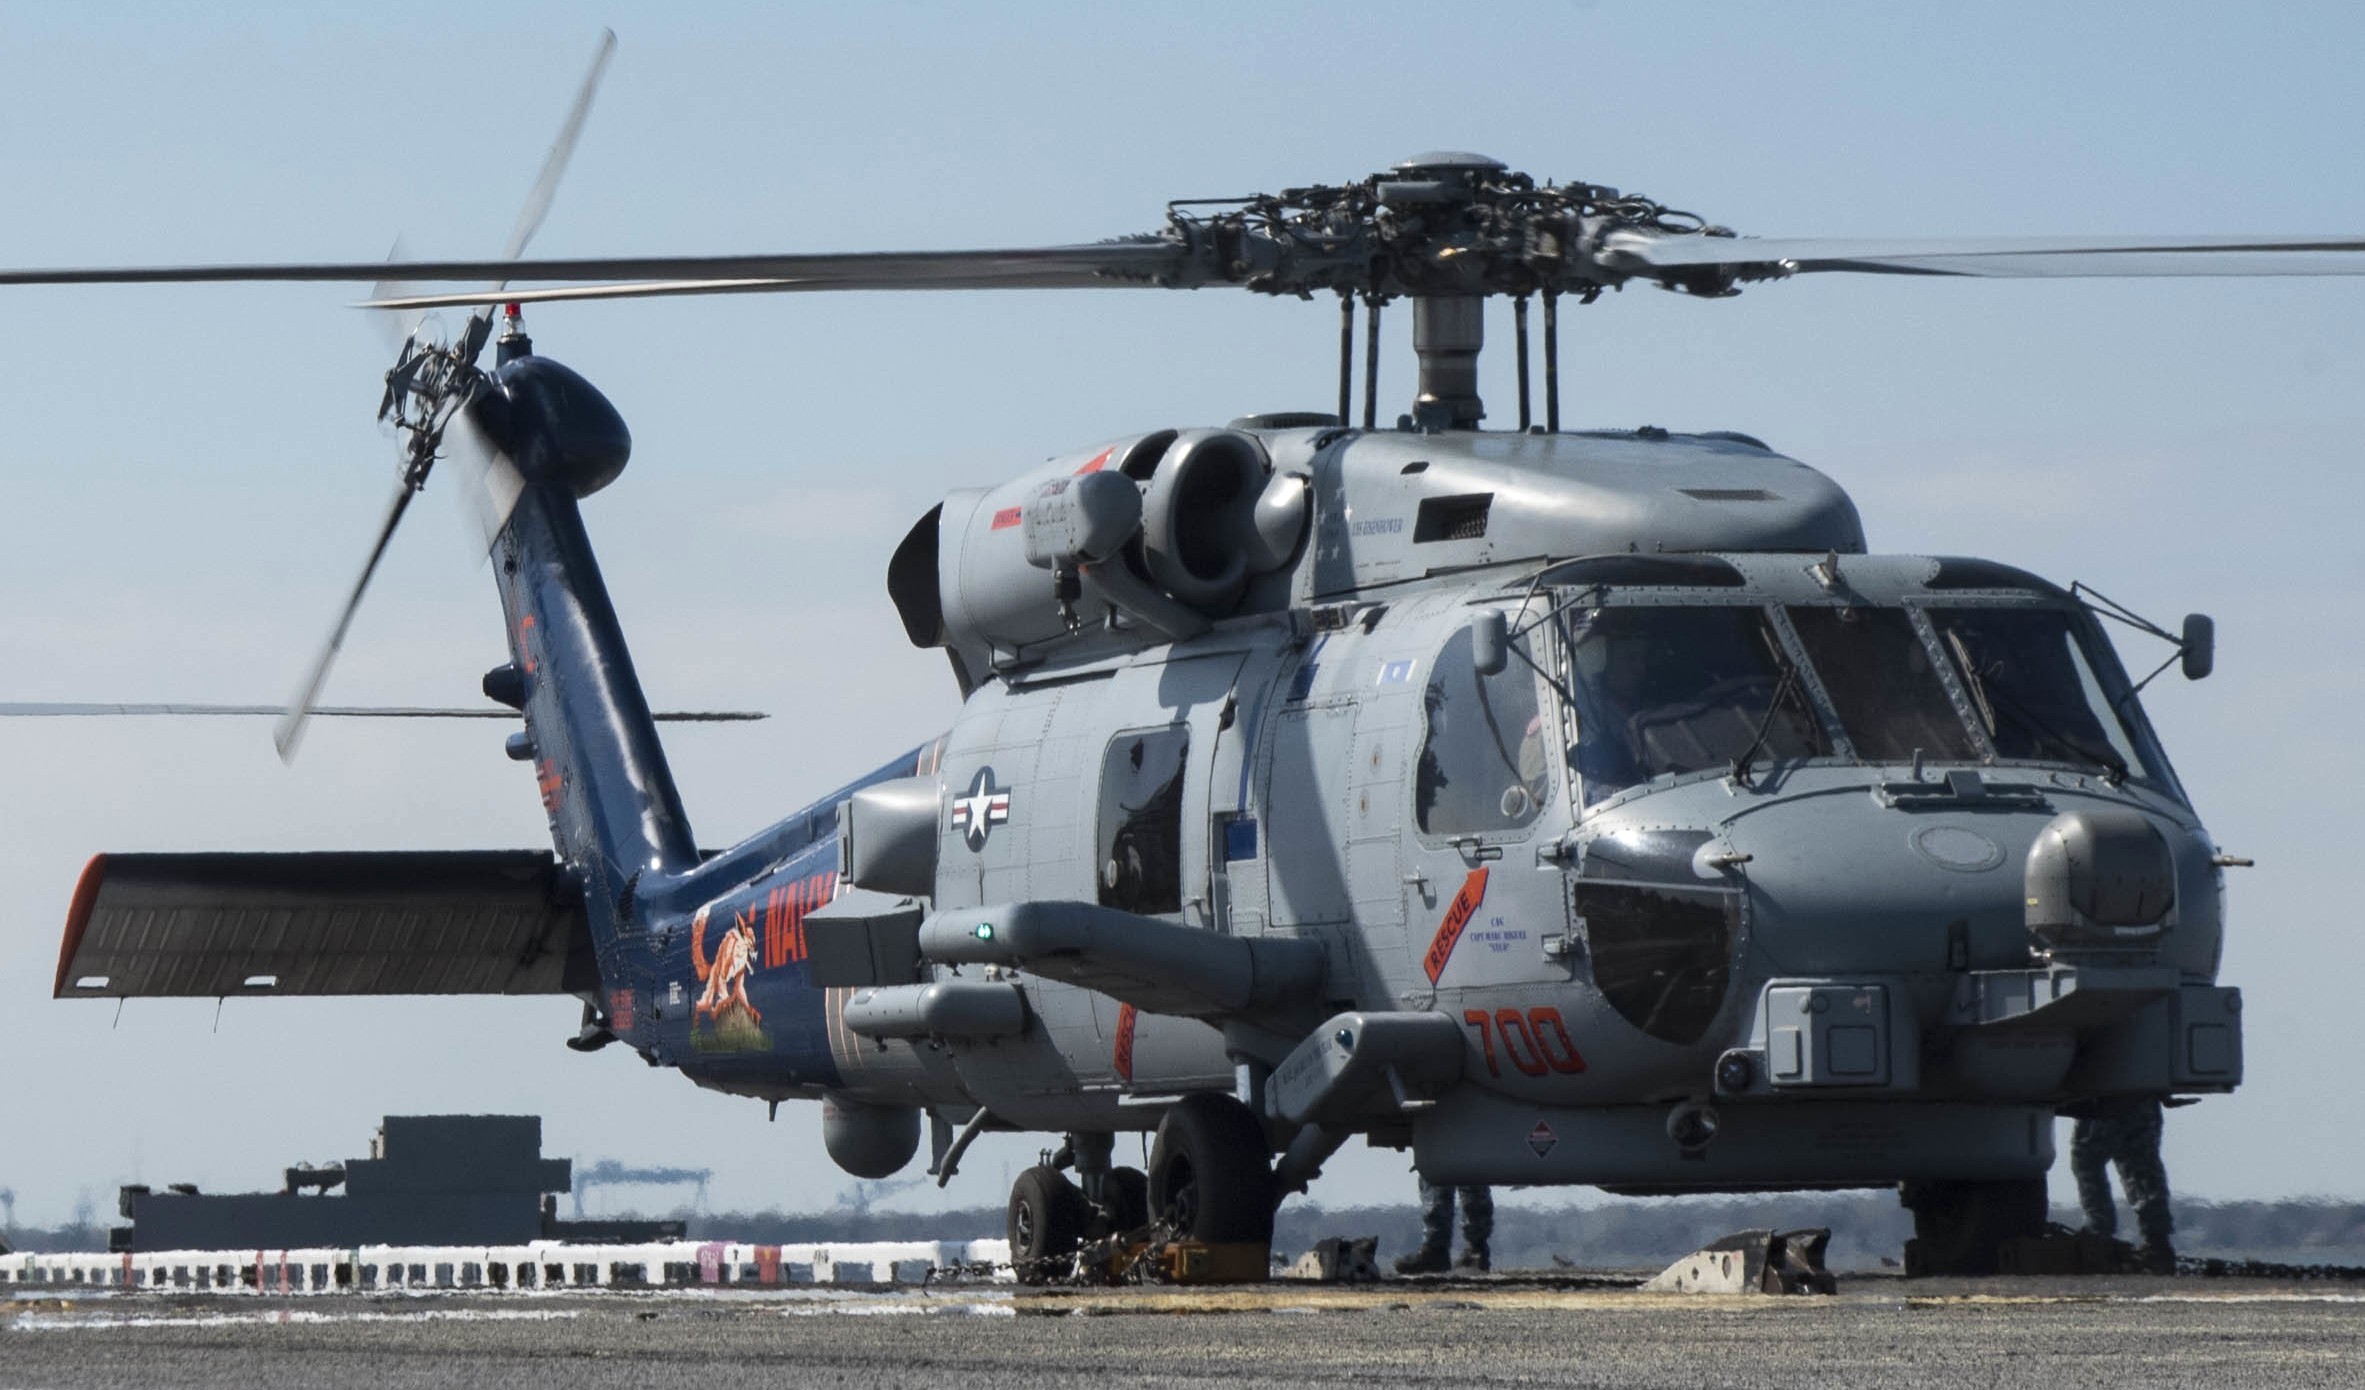 hsm-74 swamp foxes helicopter maritime strike squadron mh-60r seahawk cvw-3 cvn-72 uss abraham lincoln 48